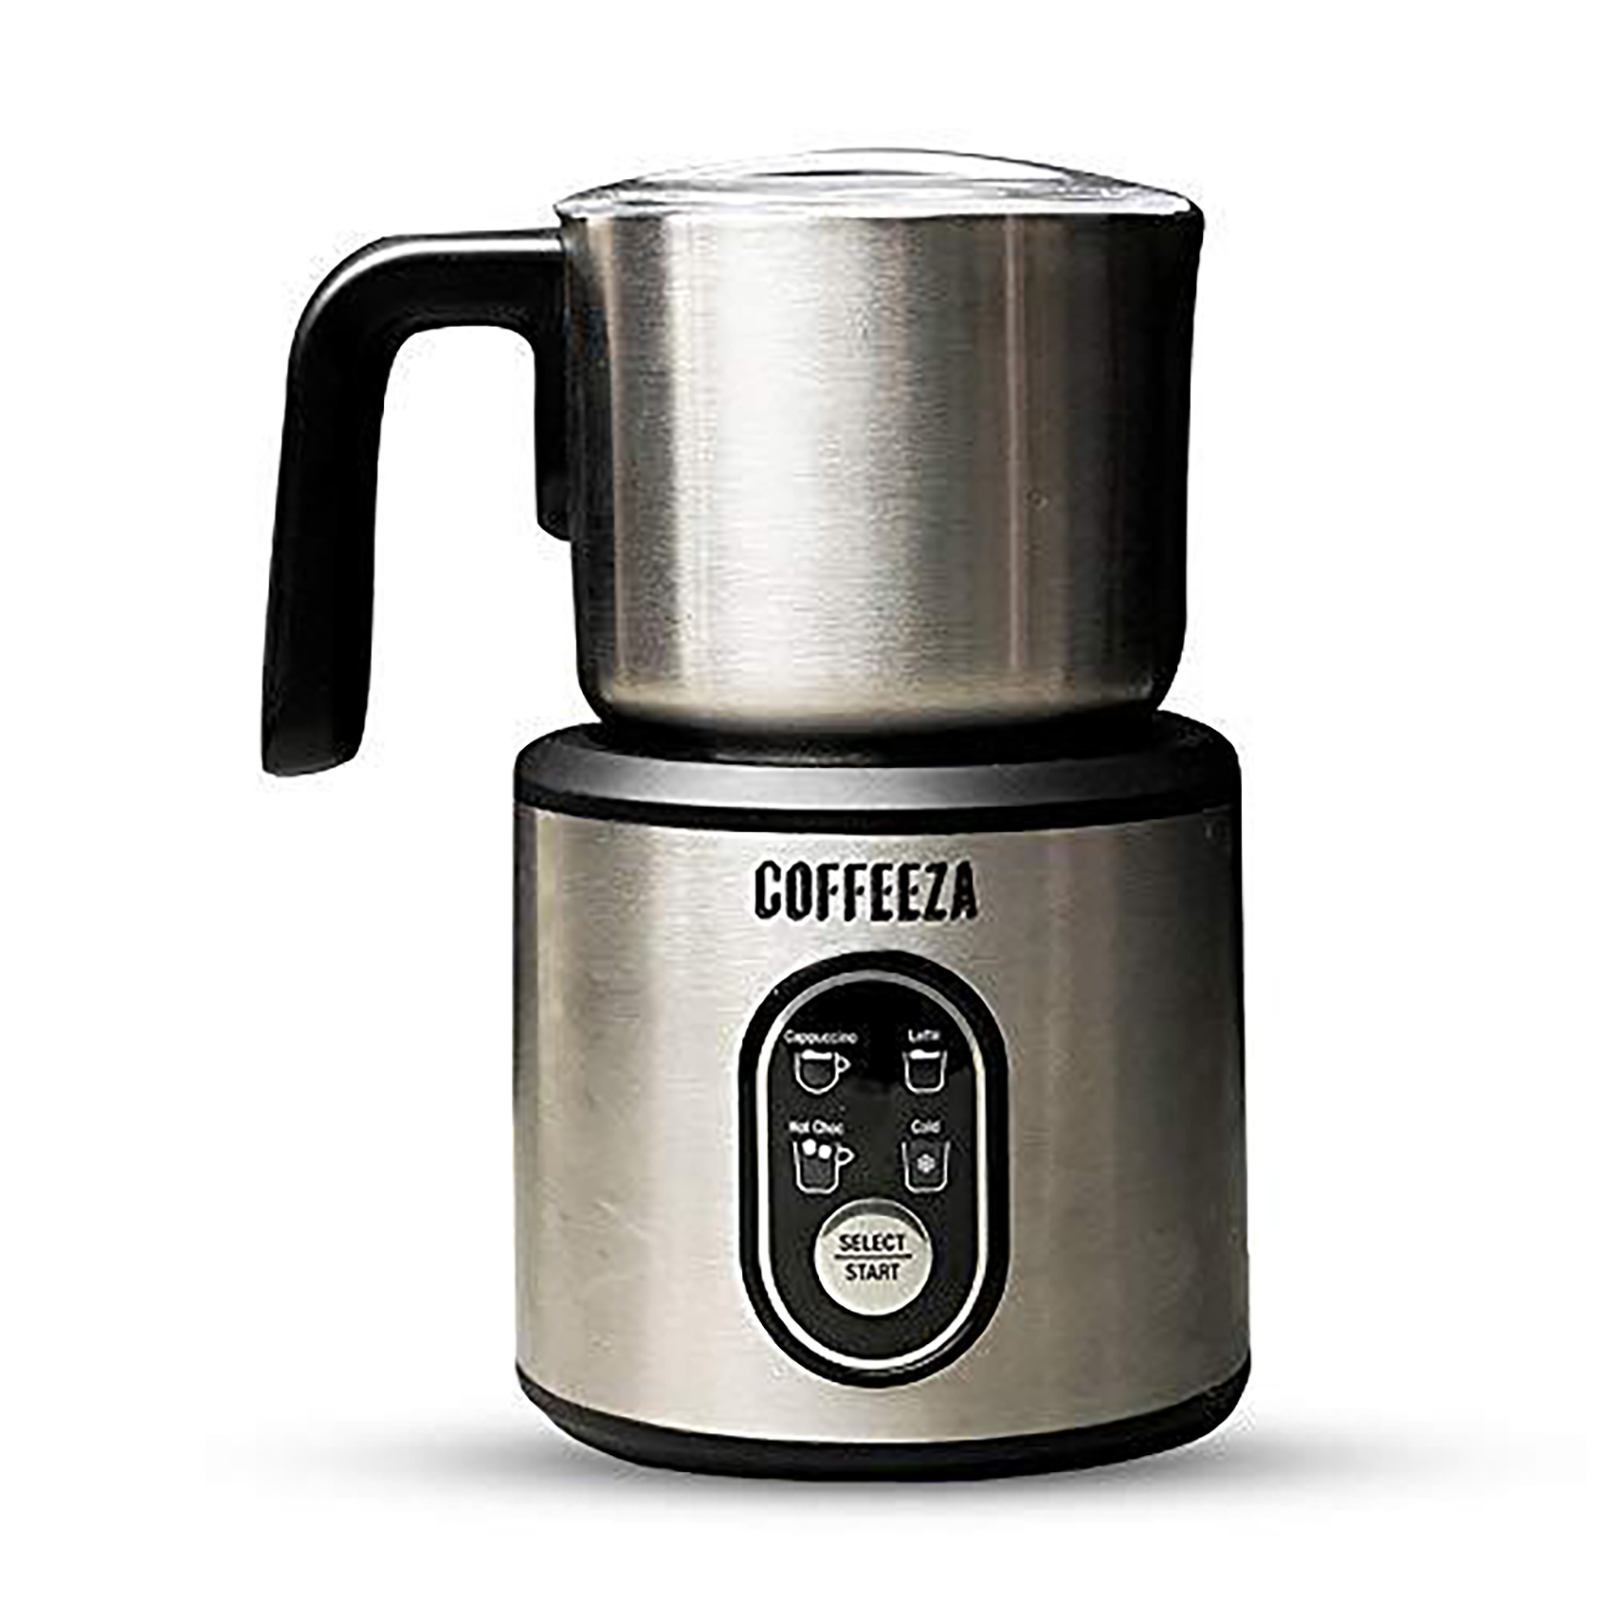 Coffeeza Frothimo Automatic Milk Frother & Heater (Makes Cappuccino, Latte & Milk Frothing, Auto-Off Function, MF-FRO1, Silver)_1